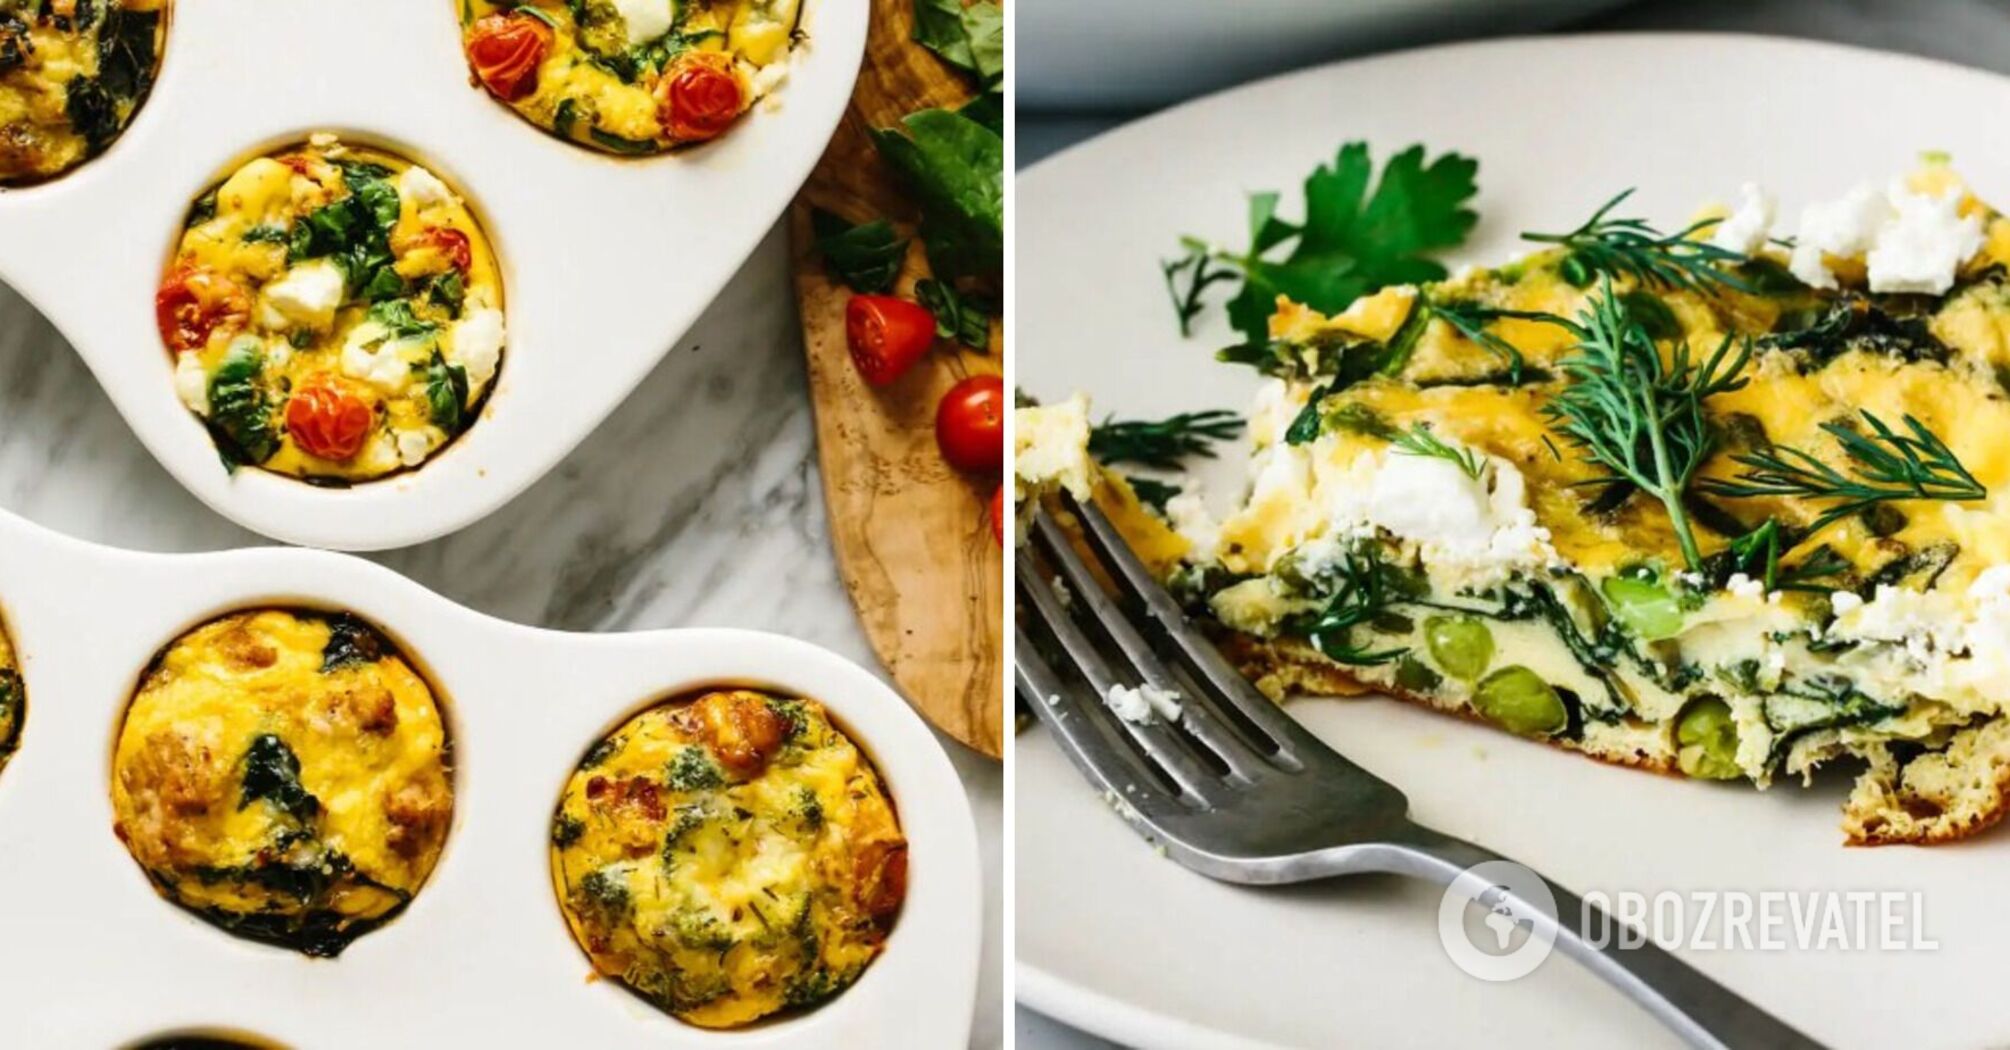 Ideas for an unusual breakfast that everyone should make: top 2